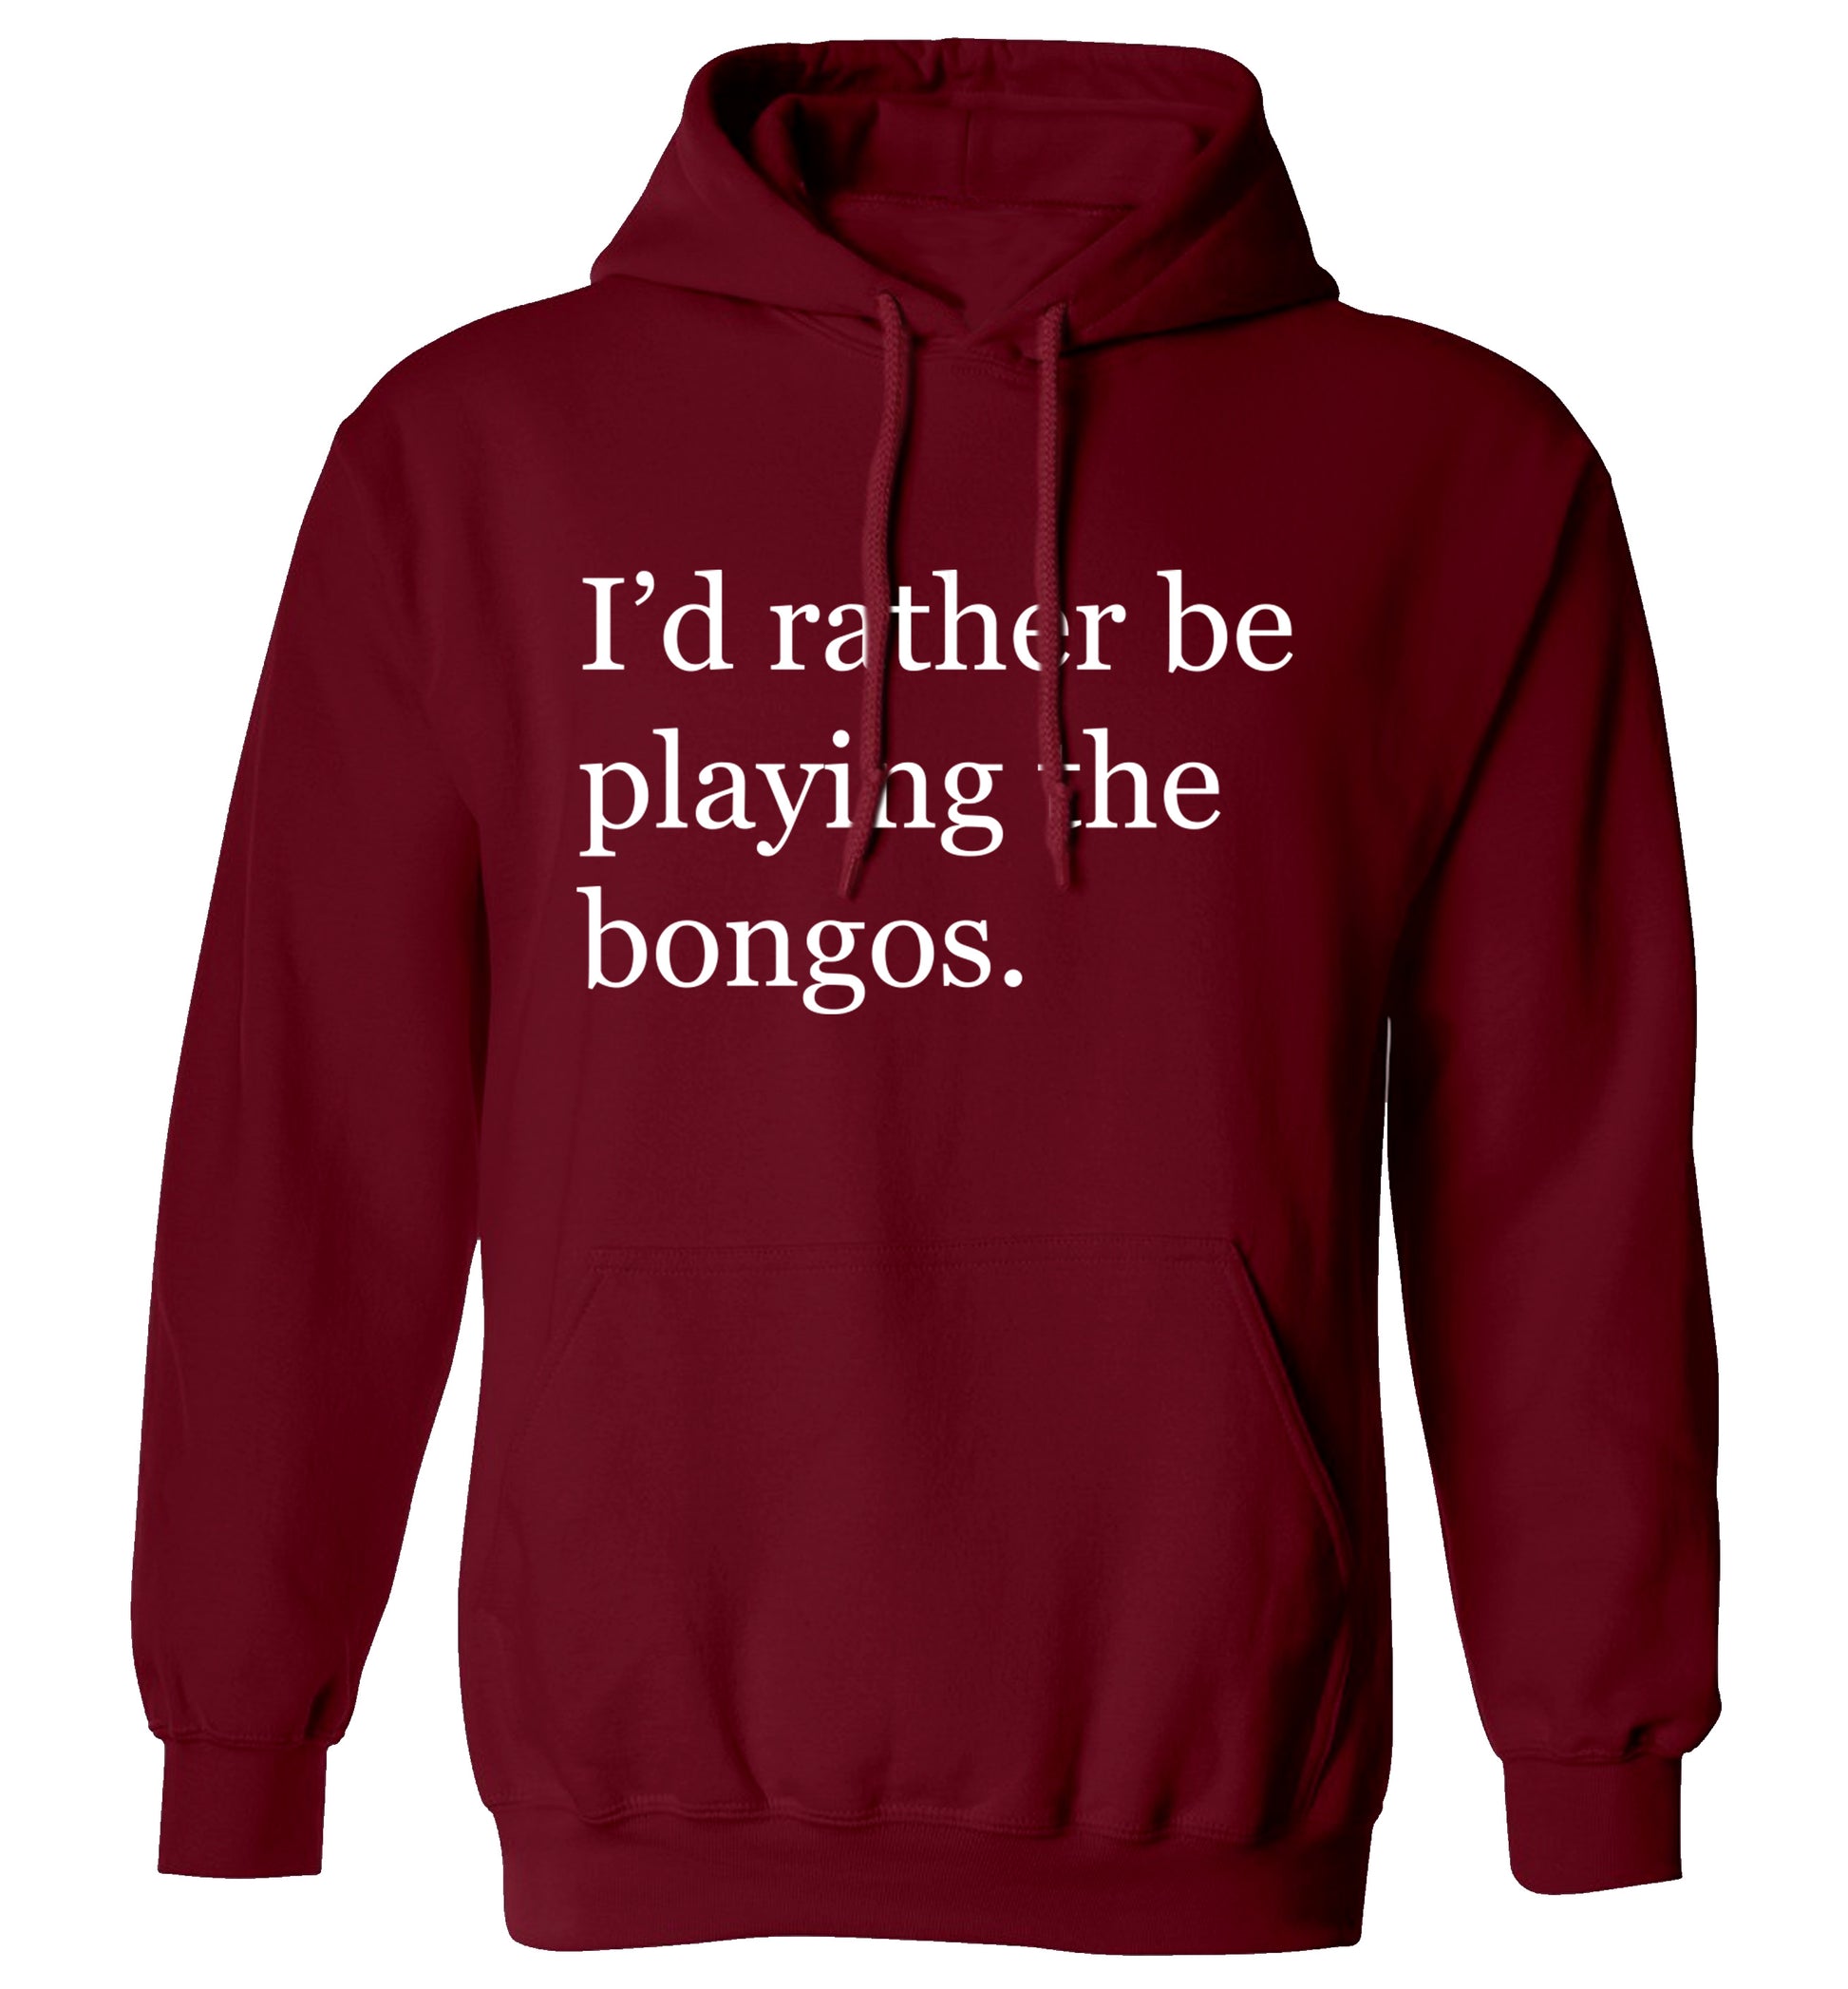 I'd rather be playing the bongos adults unisexmaroon hoodie 2XL